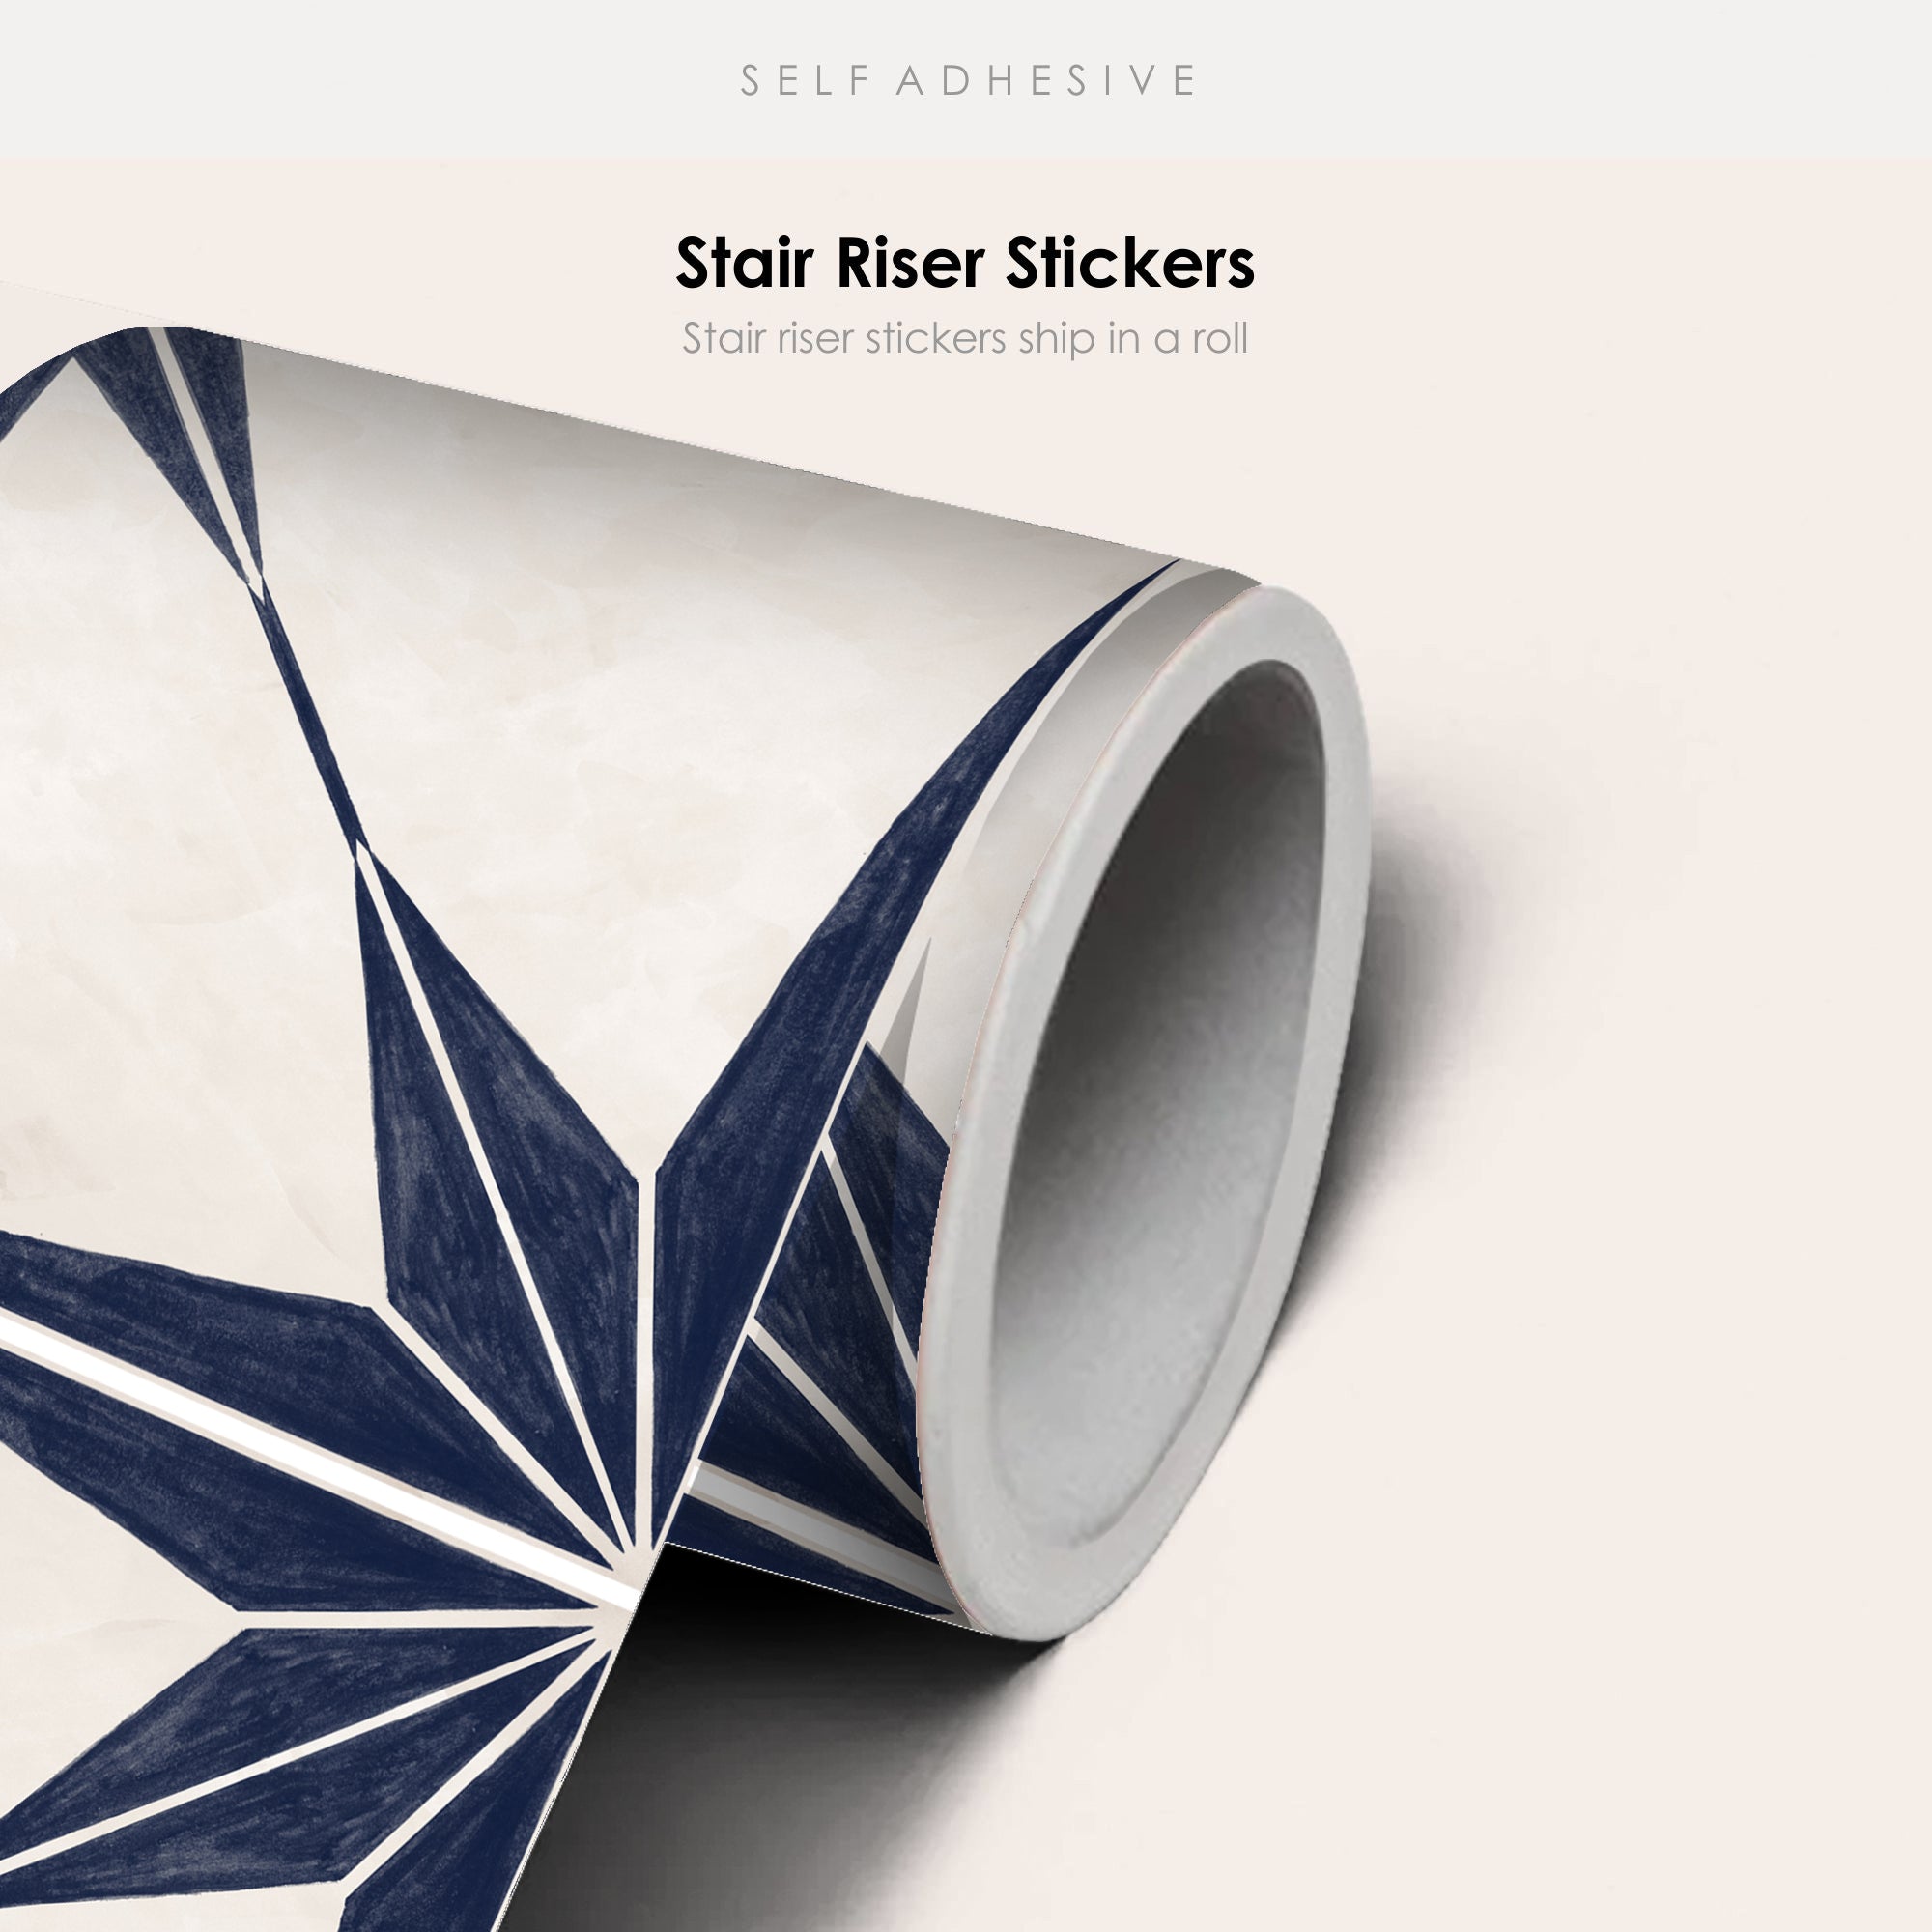 Astra in Navy Stair Riser Stickers